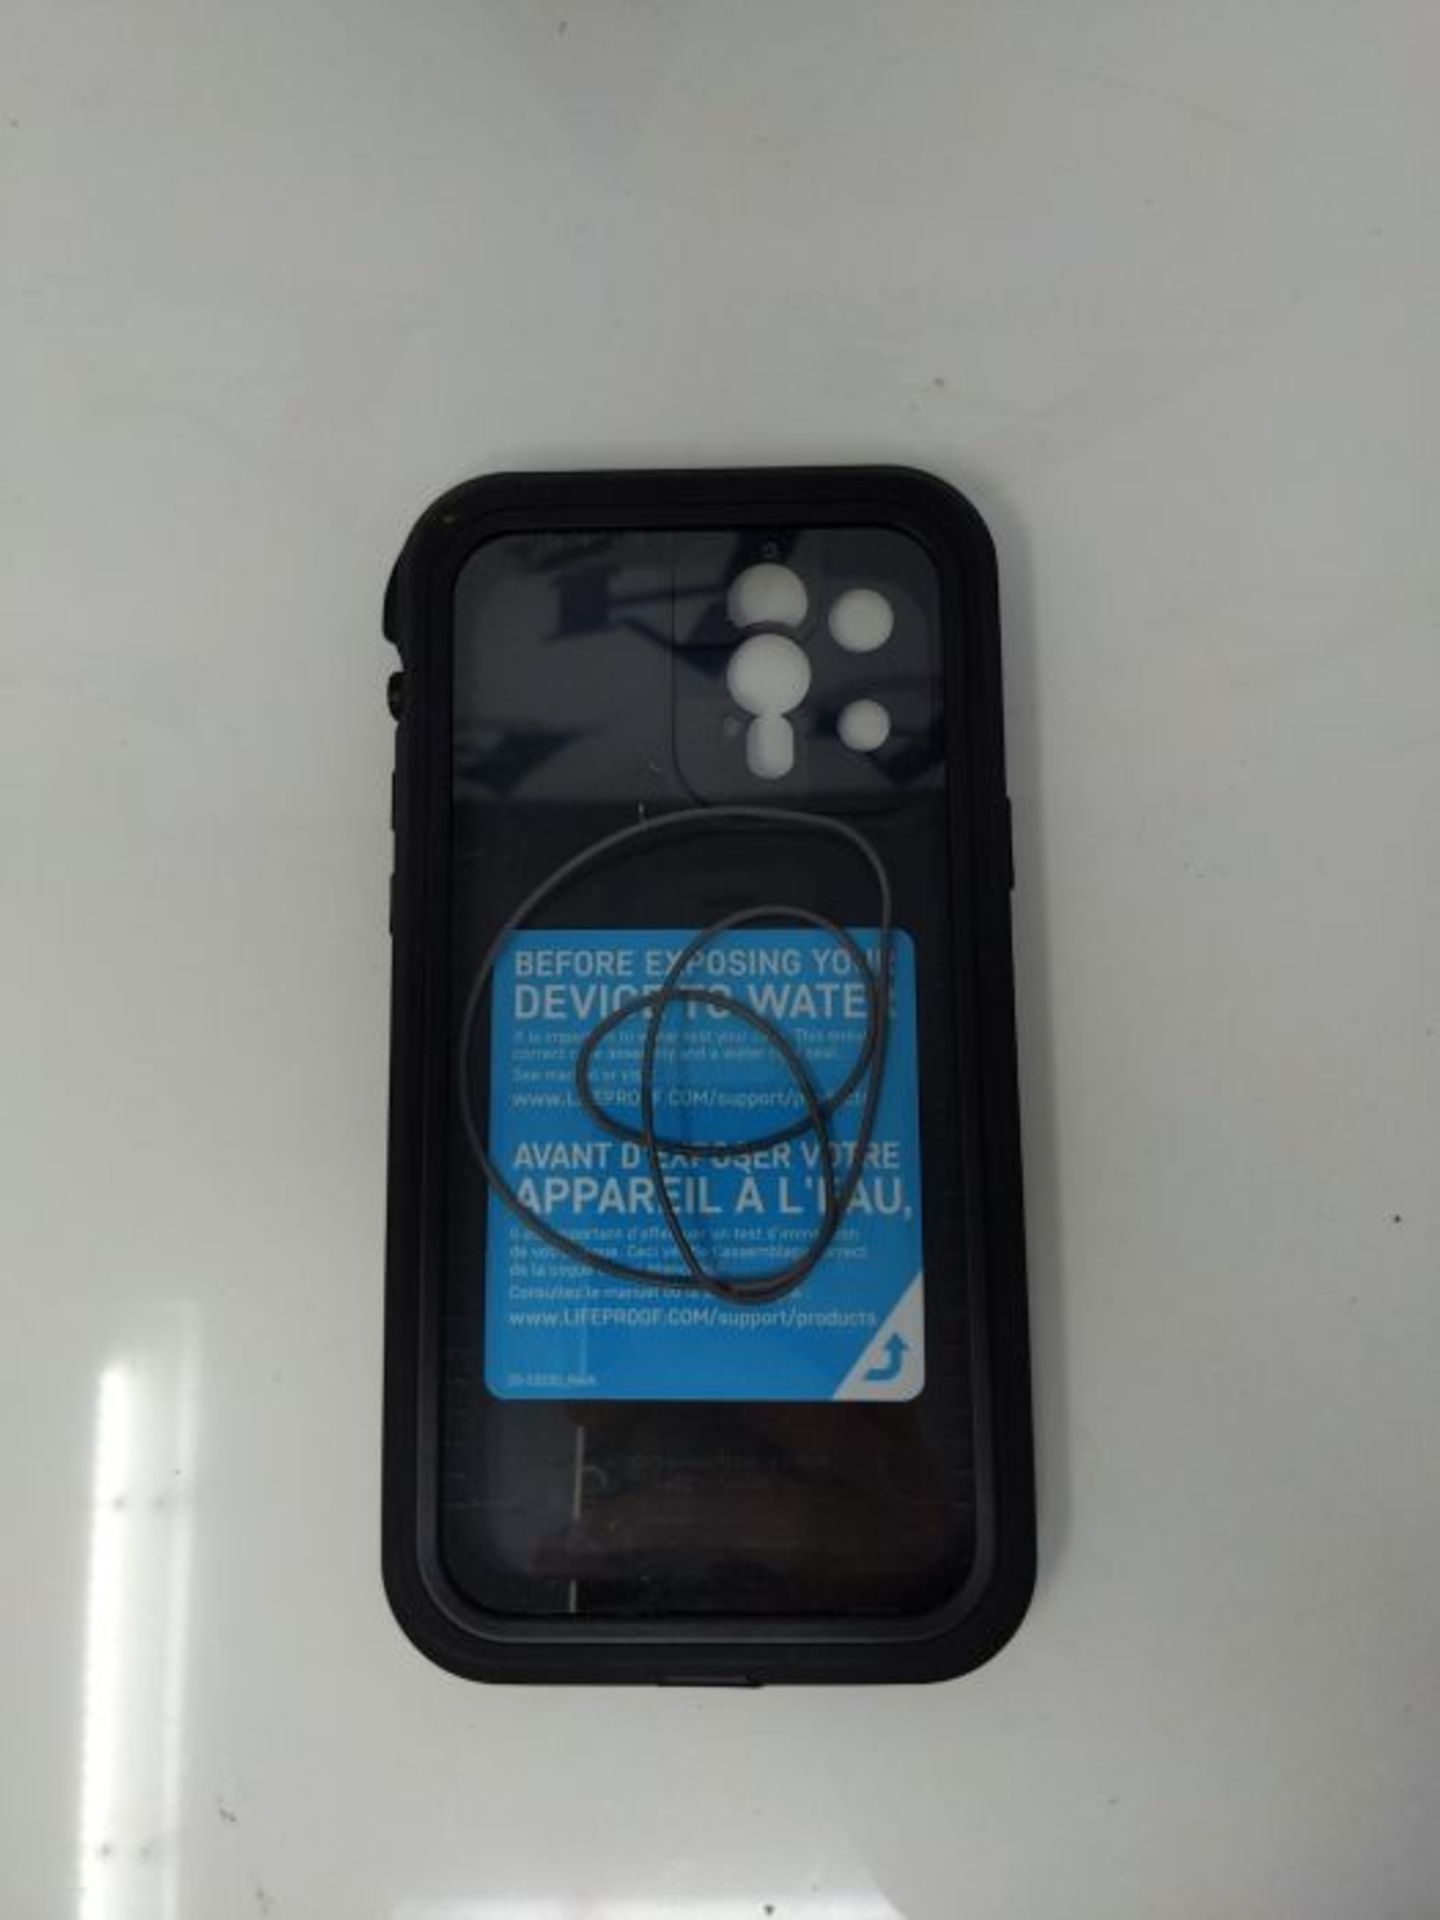 LifeProof for iPhone 12 Pro, Waterproof Drop Protective Case, Fre Series, Black - Image 5 of 9